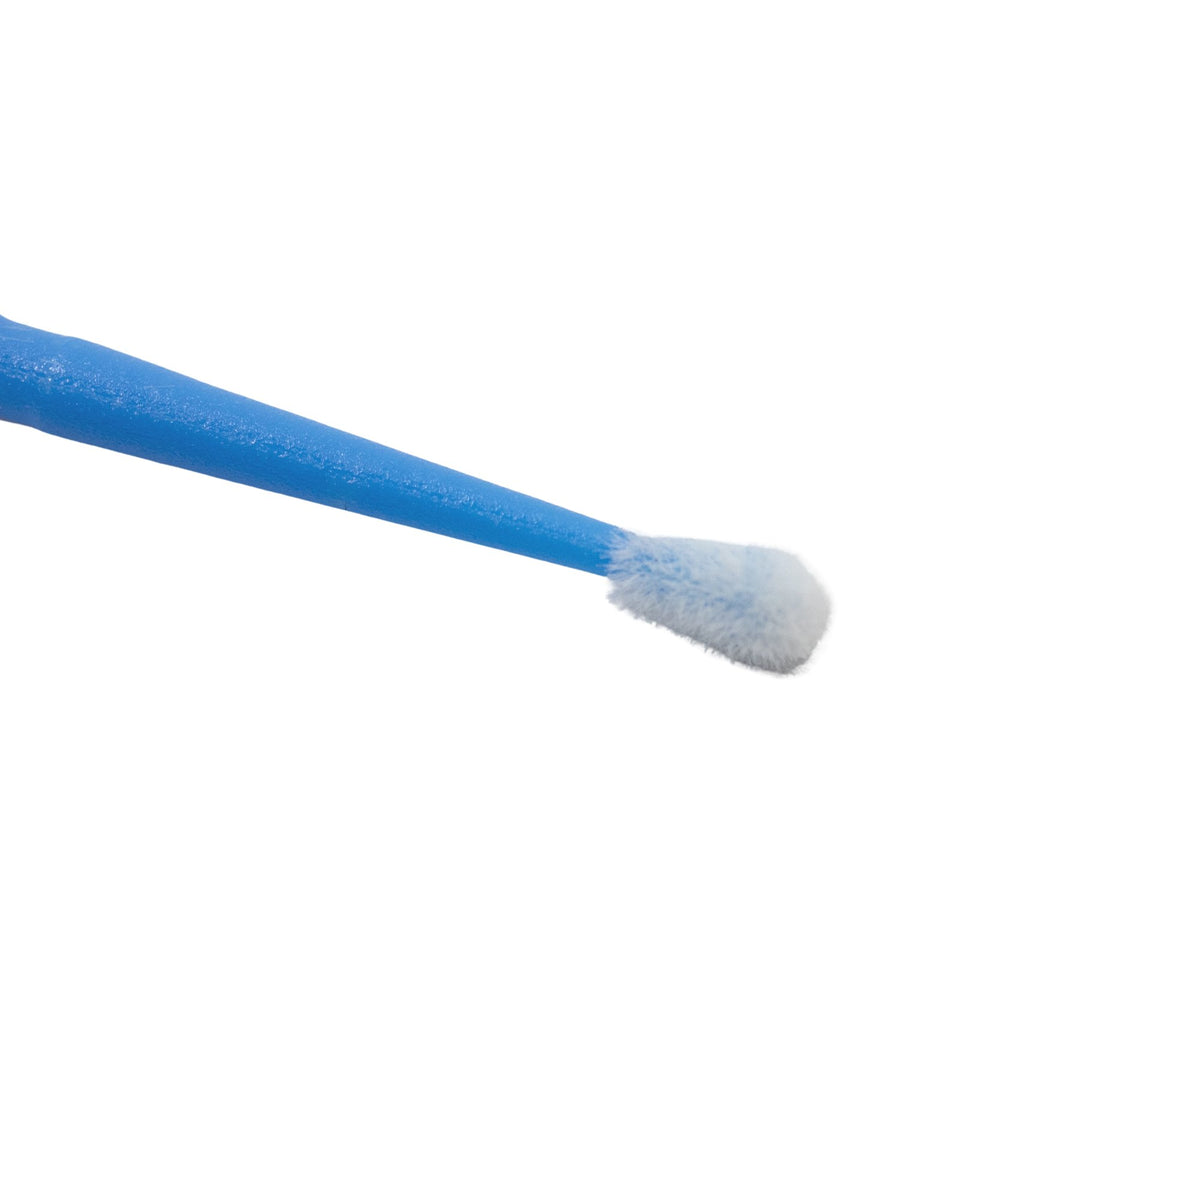 Piercing Aftercare Tiny Cleaning Swab Stick The Curated Lobecleanerswabswabs